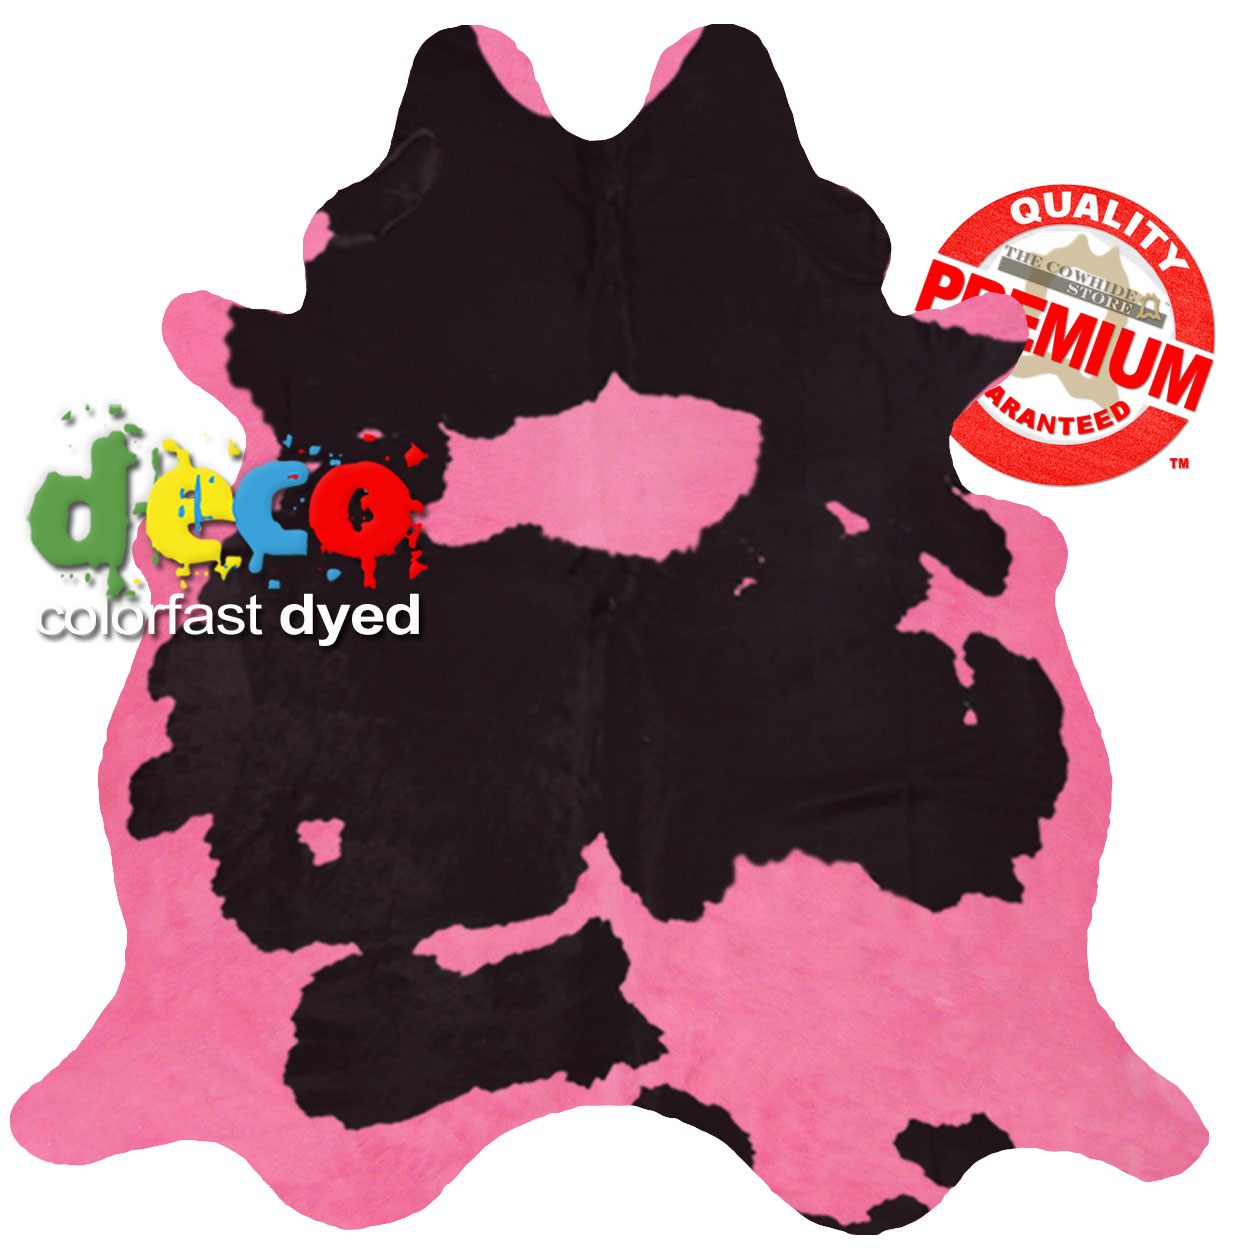 322516 - Colorfast Dyed Spotted on Pink Cowhide - Choose Size